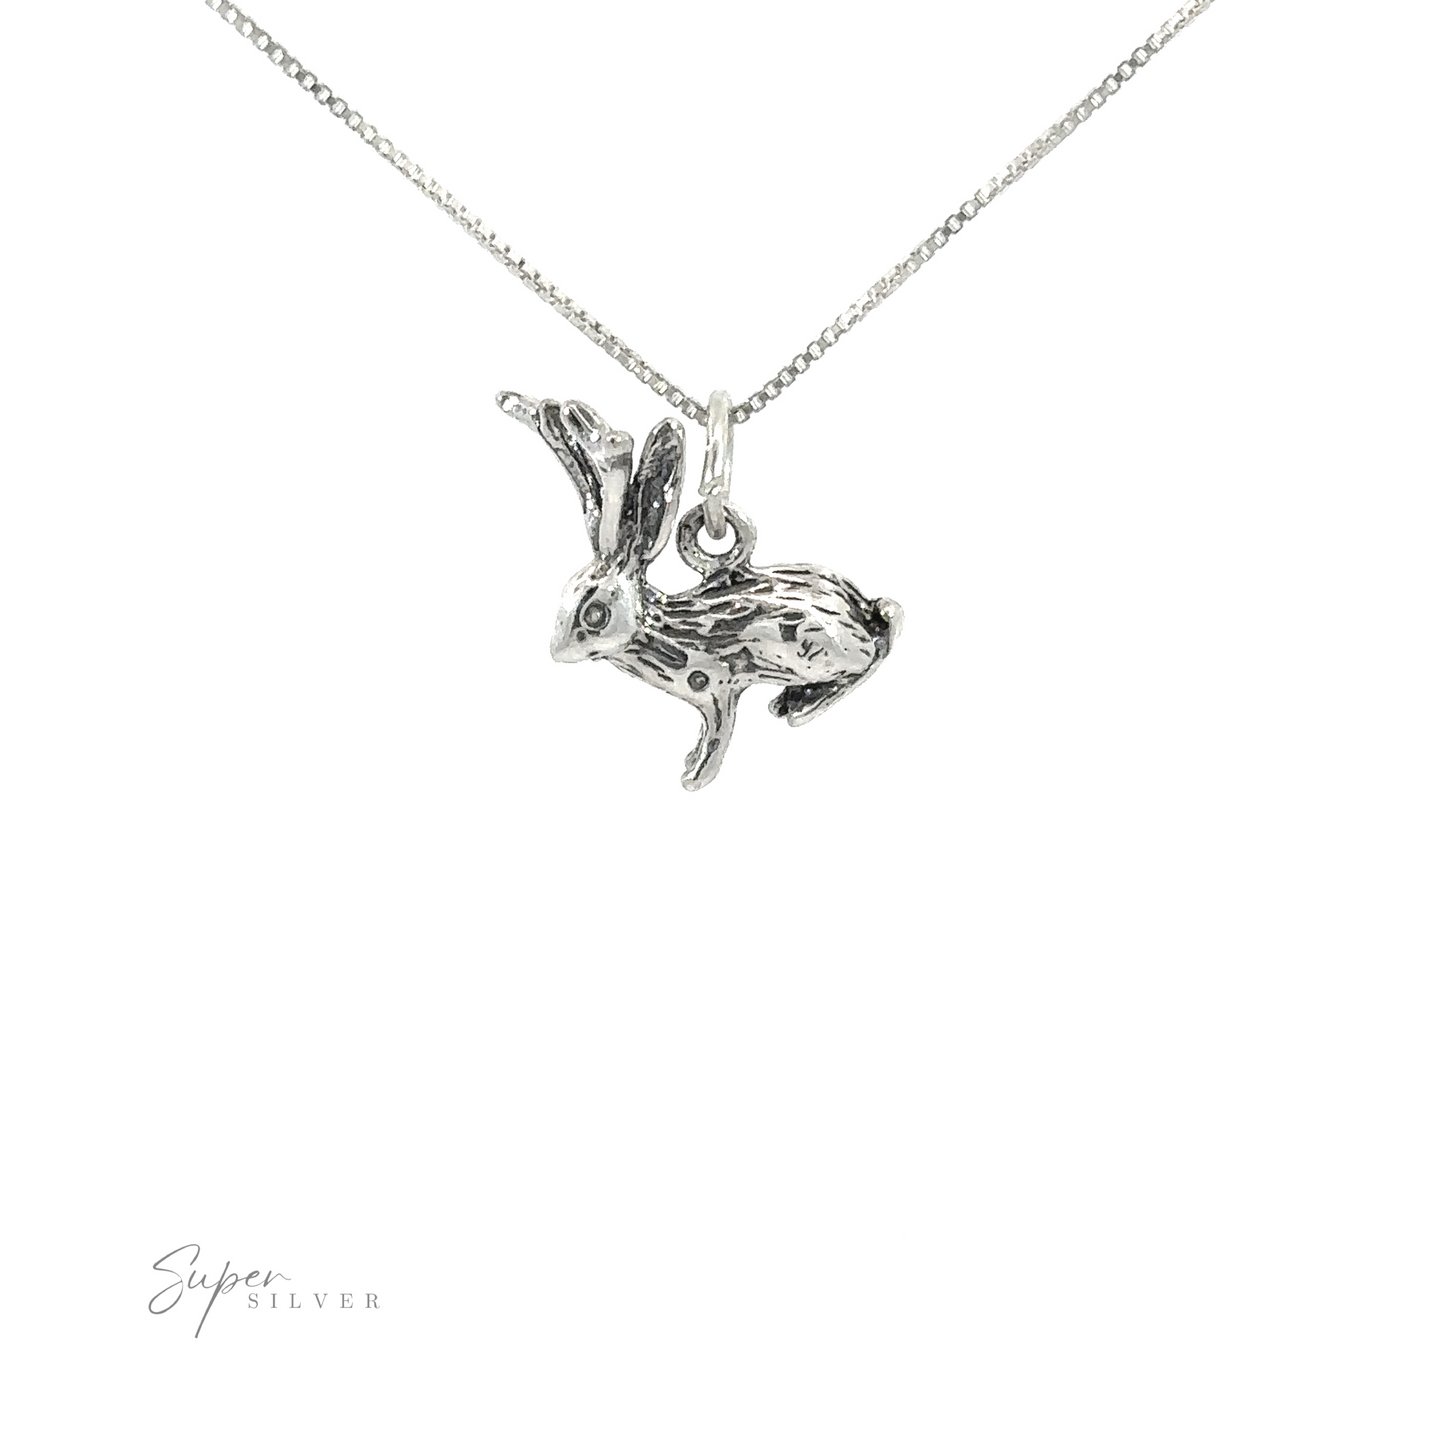 Silver Jackalope Charm pendant on a chain necklace.